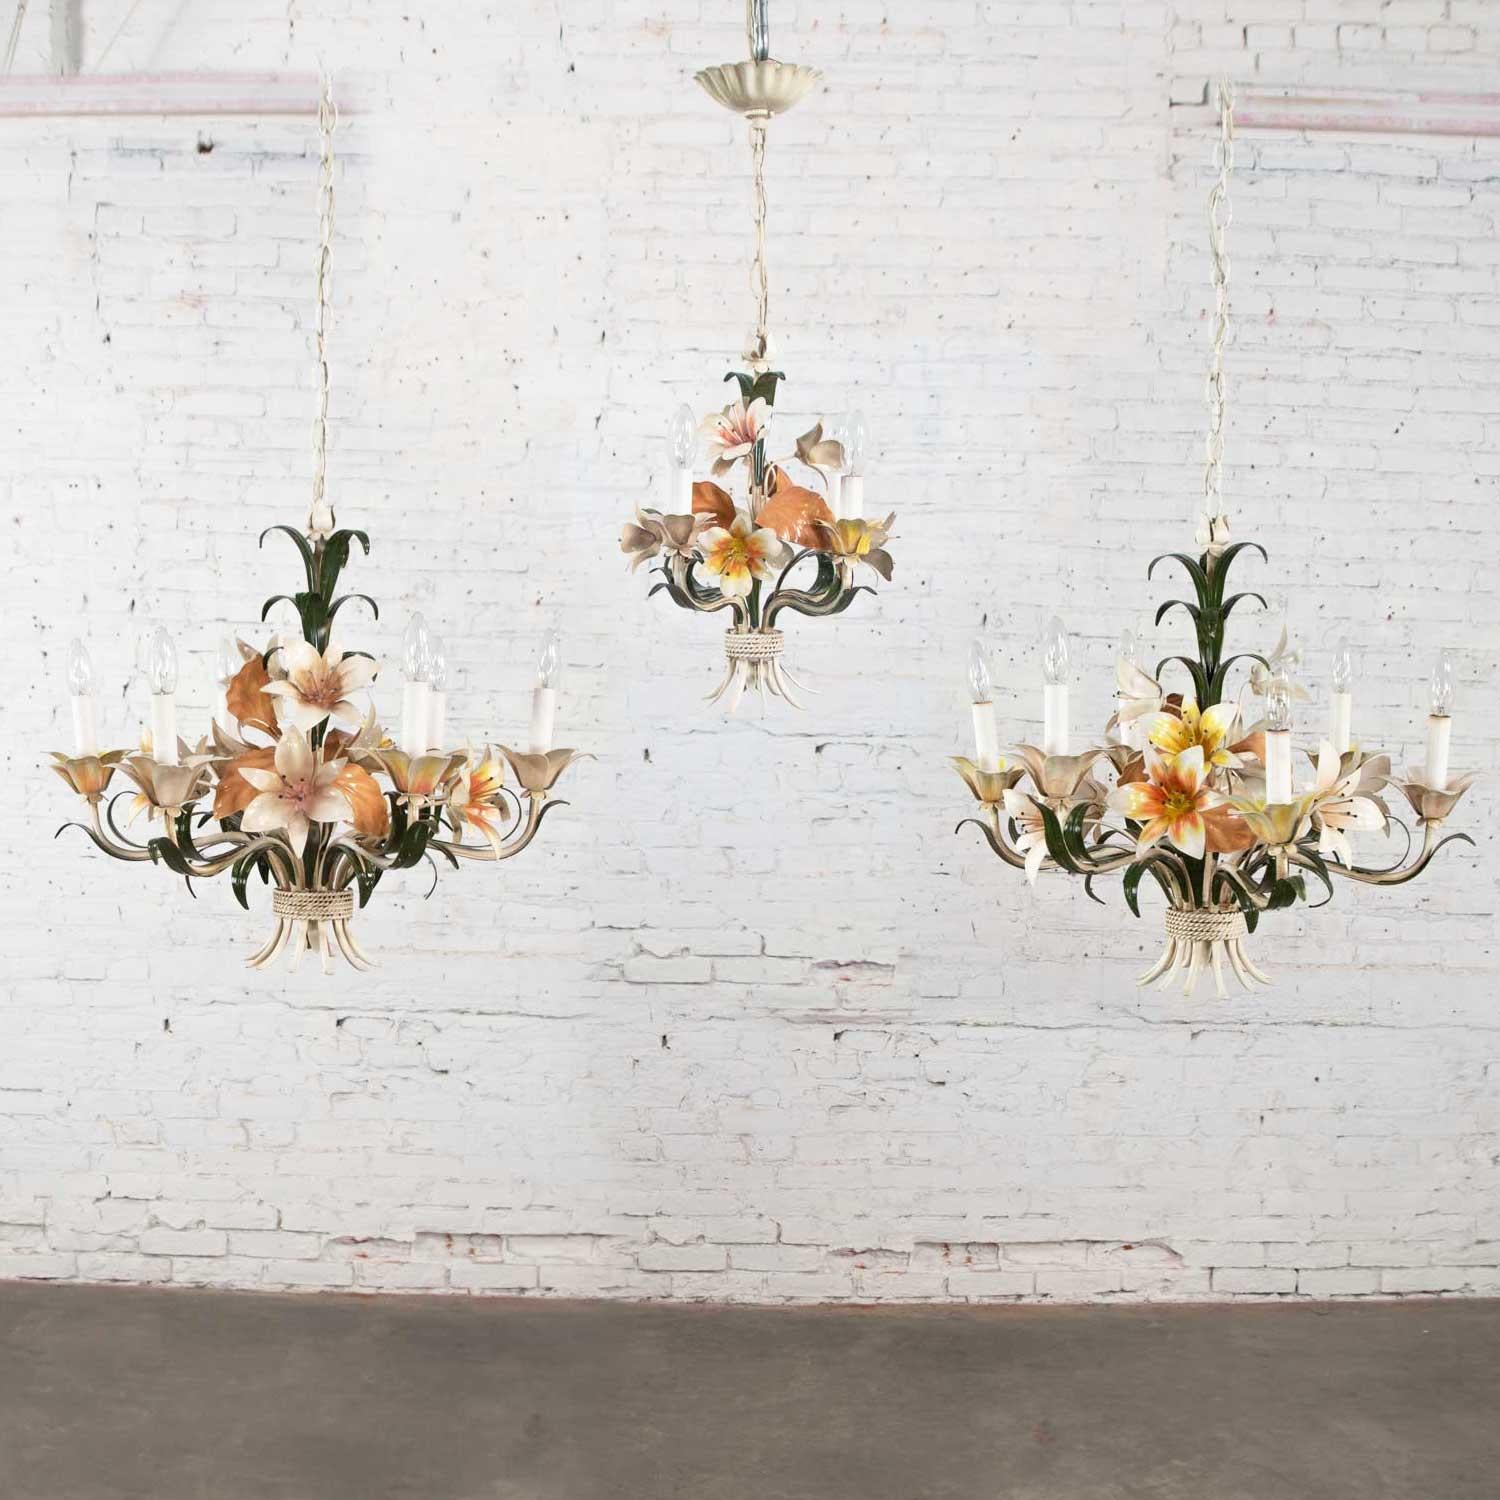 Lovely trio of vintage tole painted floral chandeliers. There are two (2) medium sized chandeliers with 6-light and one (1) small chandelier with 4-light. They are in wonderful vintage condition with no outstanding flaws. We have touched up some